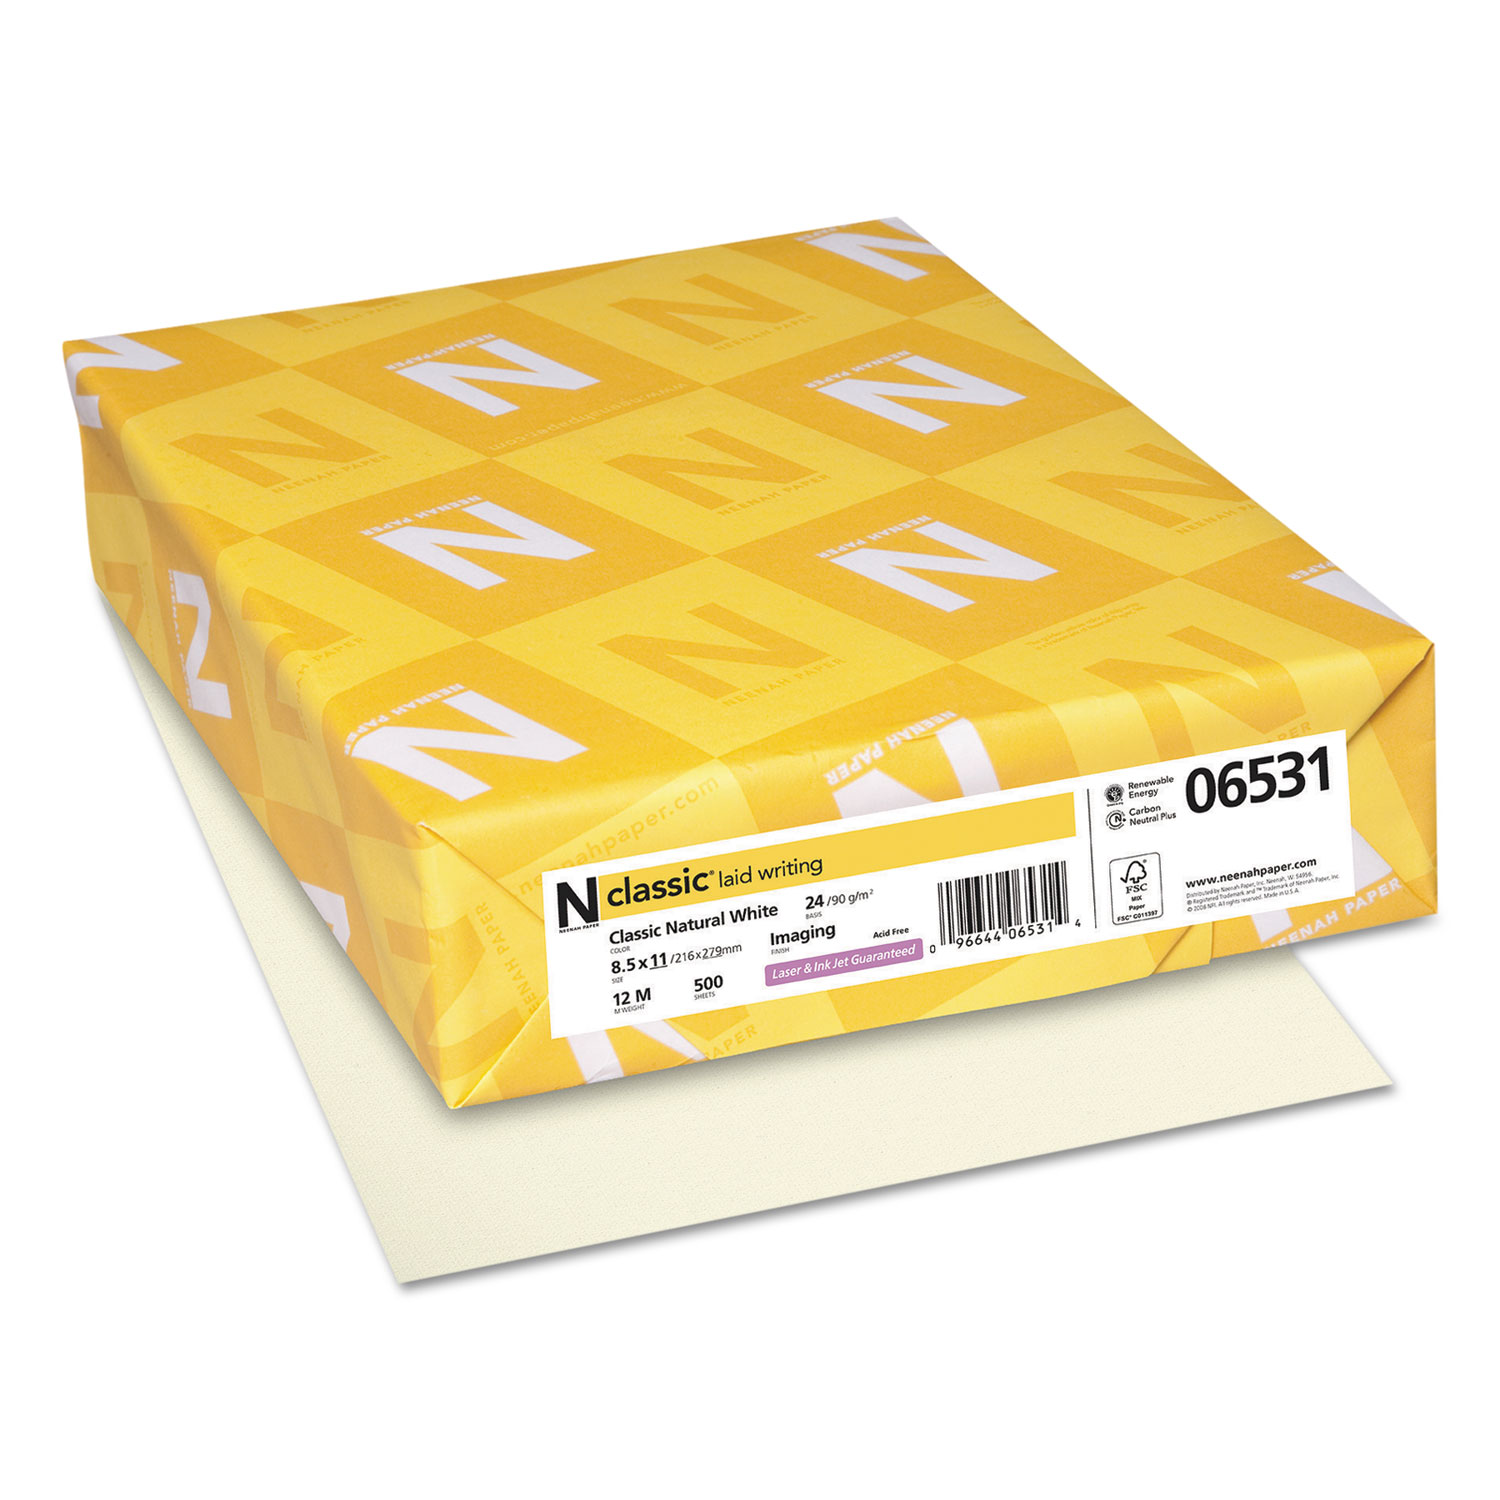  Neenah Paper 06531 CLASSIC Laid Stationery, 24 lb, 8.5 x 11, Classic Natural White, 500/Ream (NEE06531) 